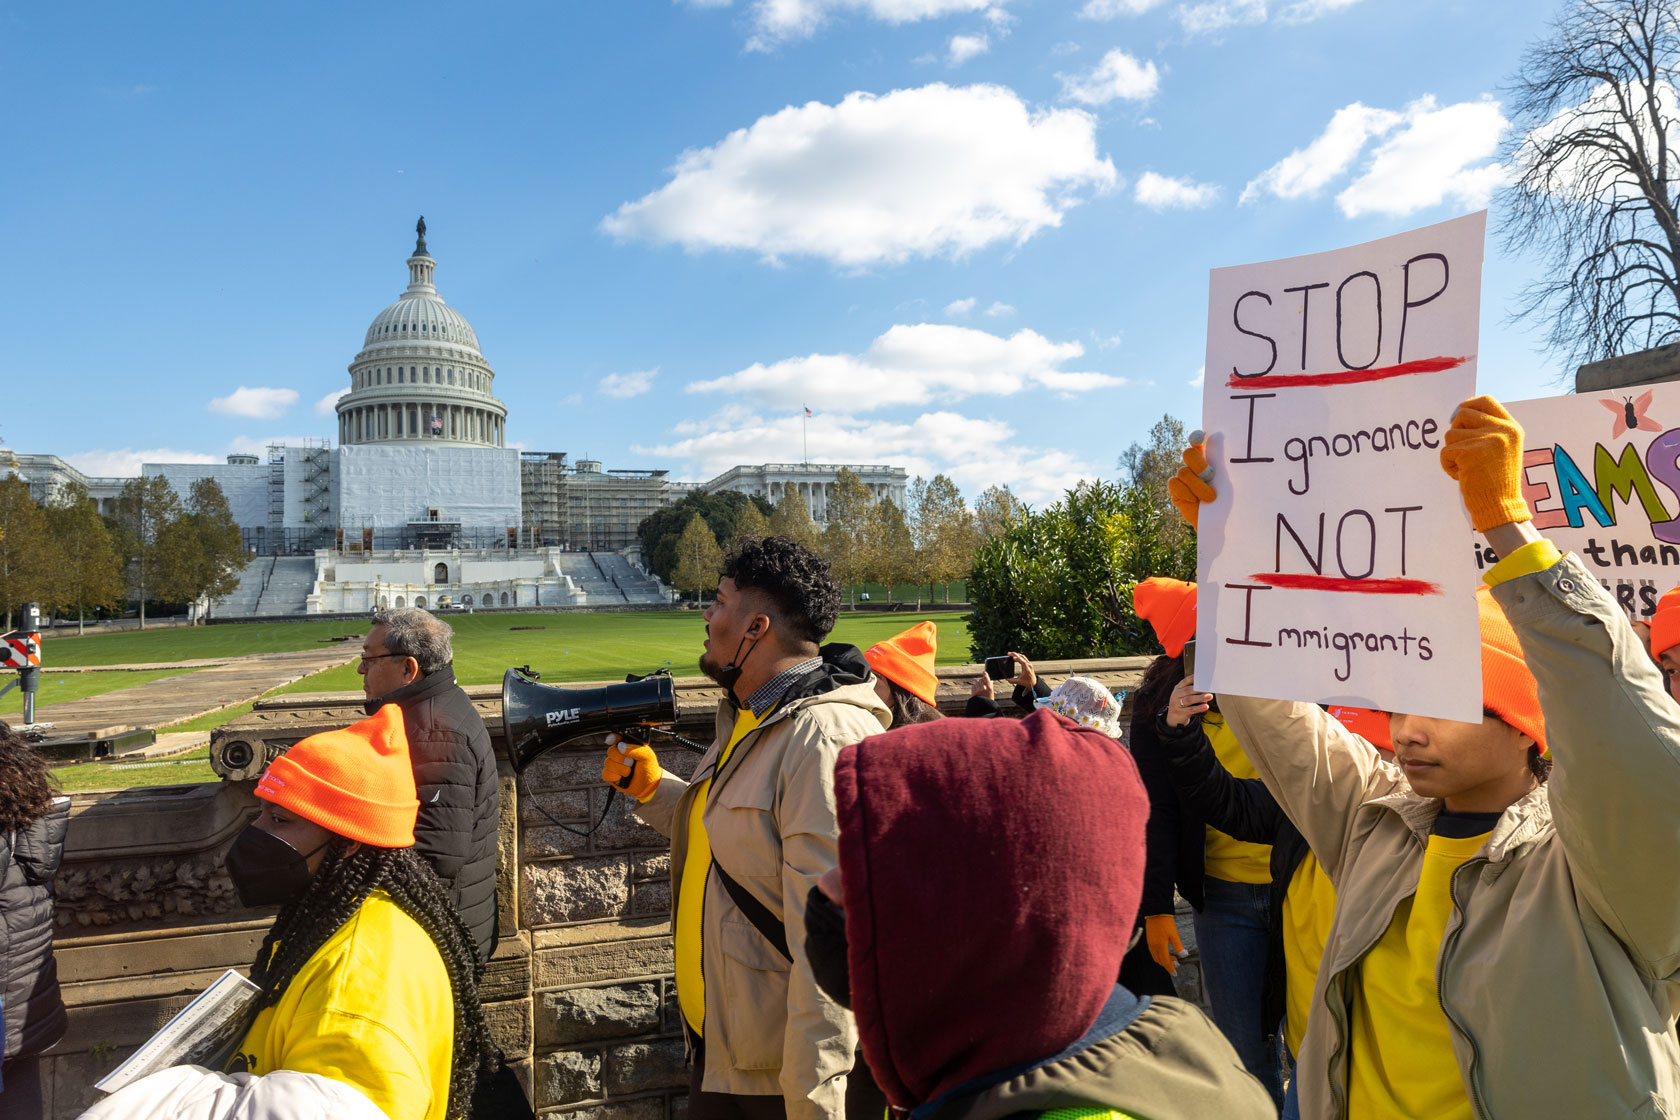 A group of people holding signs is seen with the U.S. Capitol building in the background.